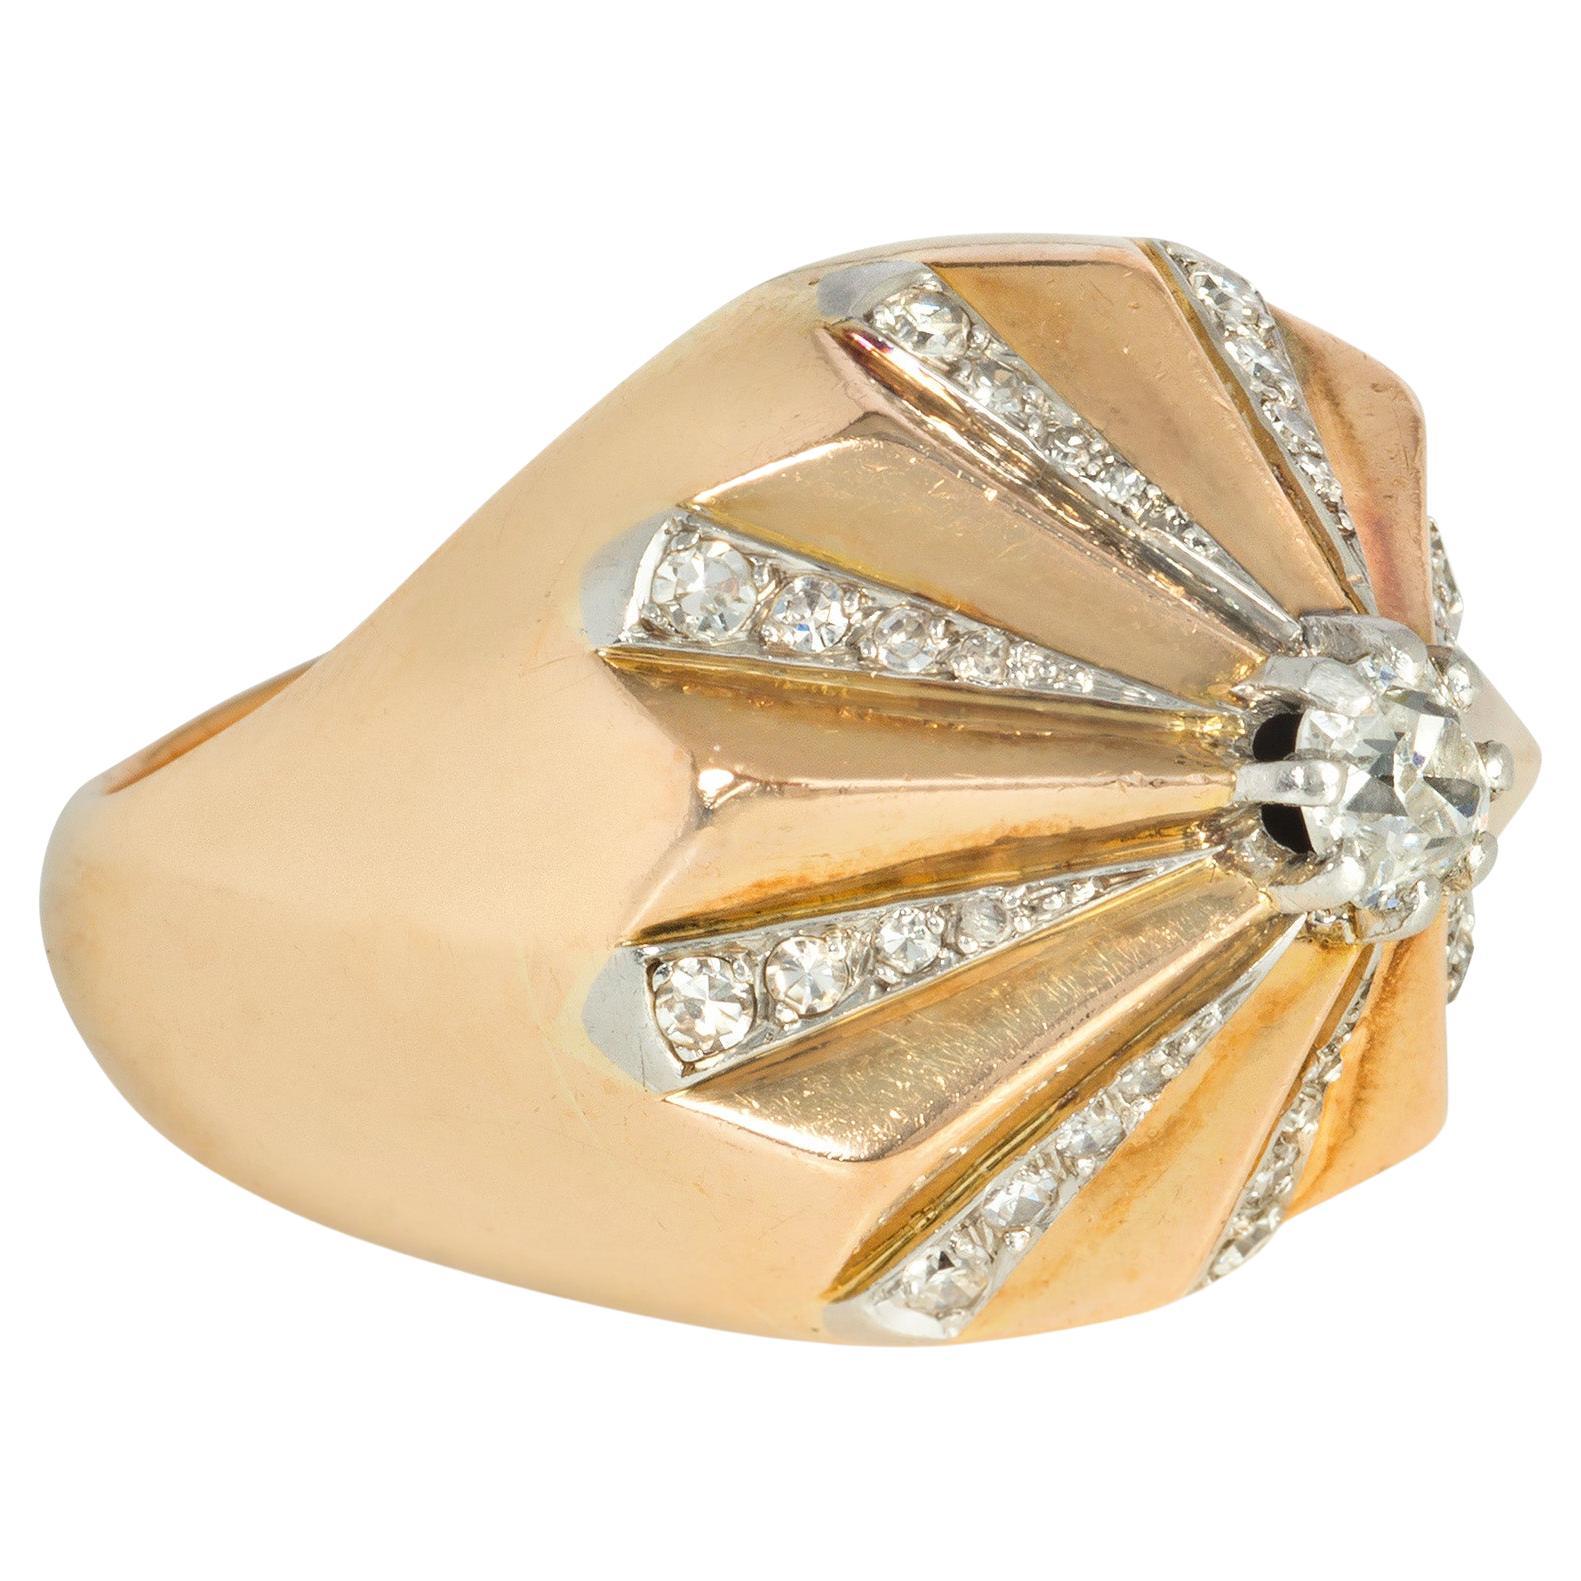 Retro French Gold and Diamond Cone-Shaped Ring with Radiating Diamond Pattern